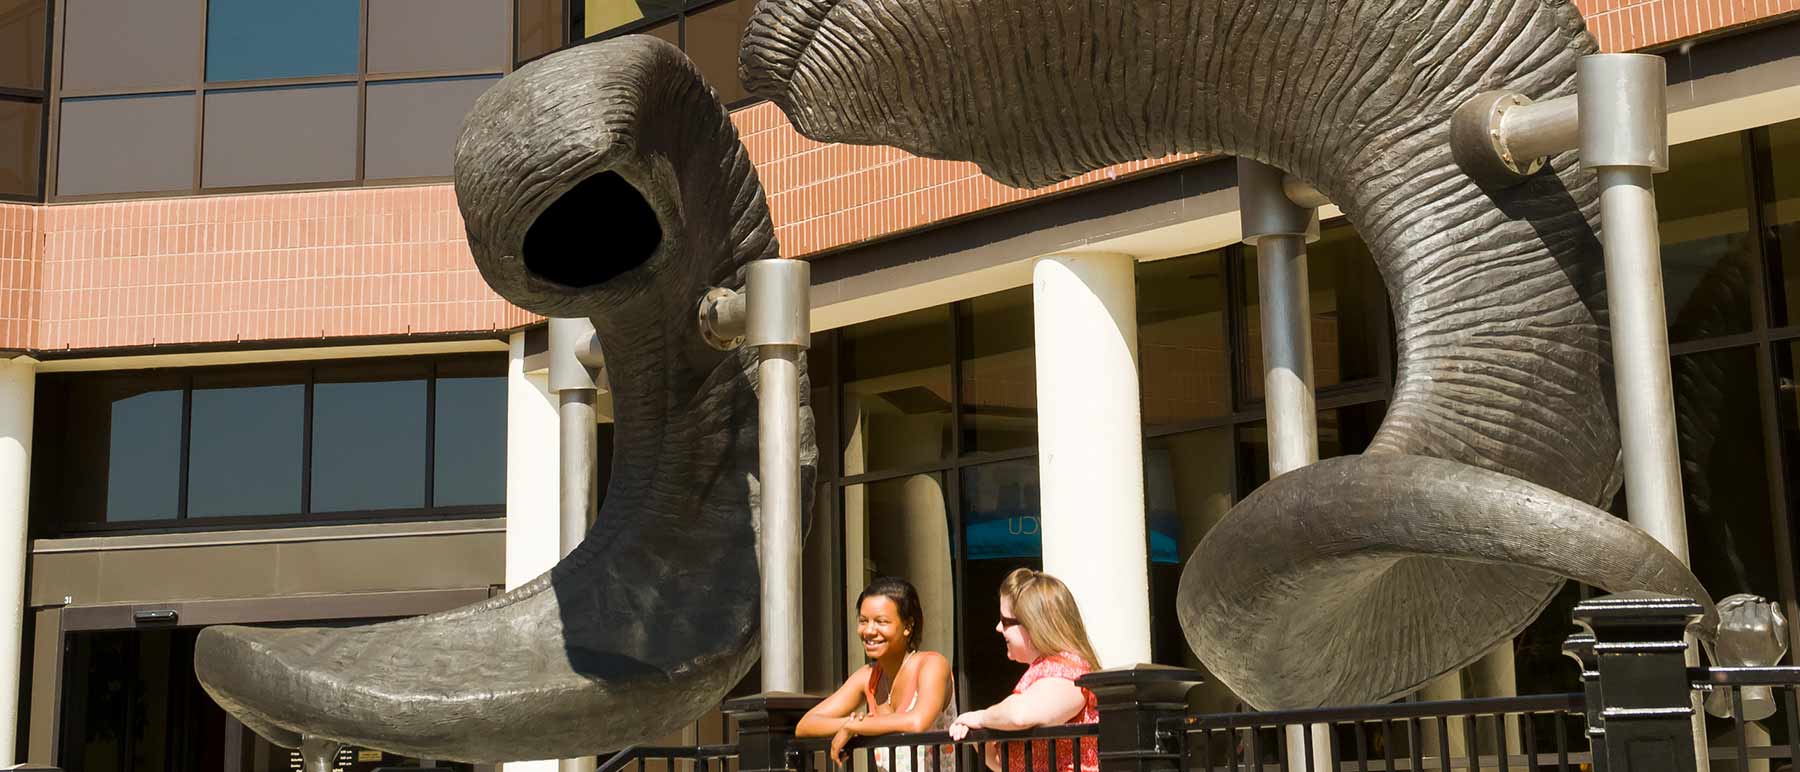 The Ram Horns at the plaza of the v. c. u. commons.